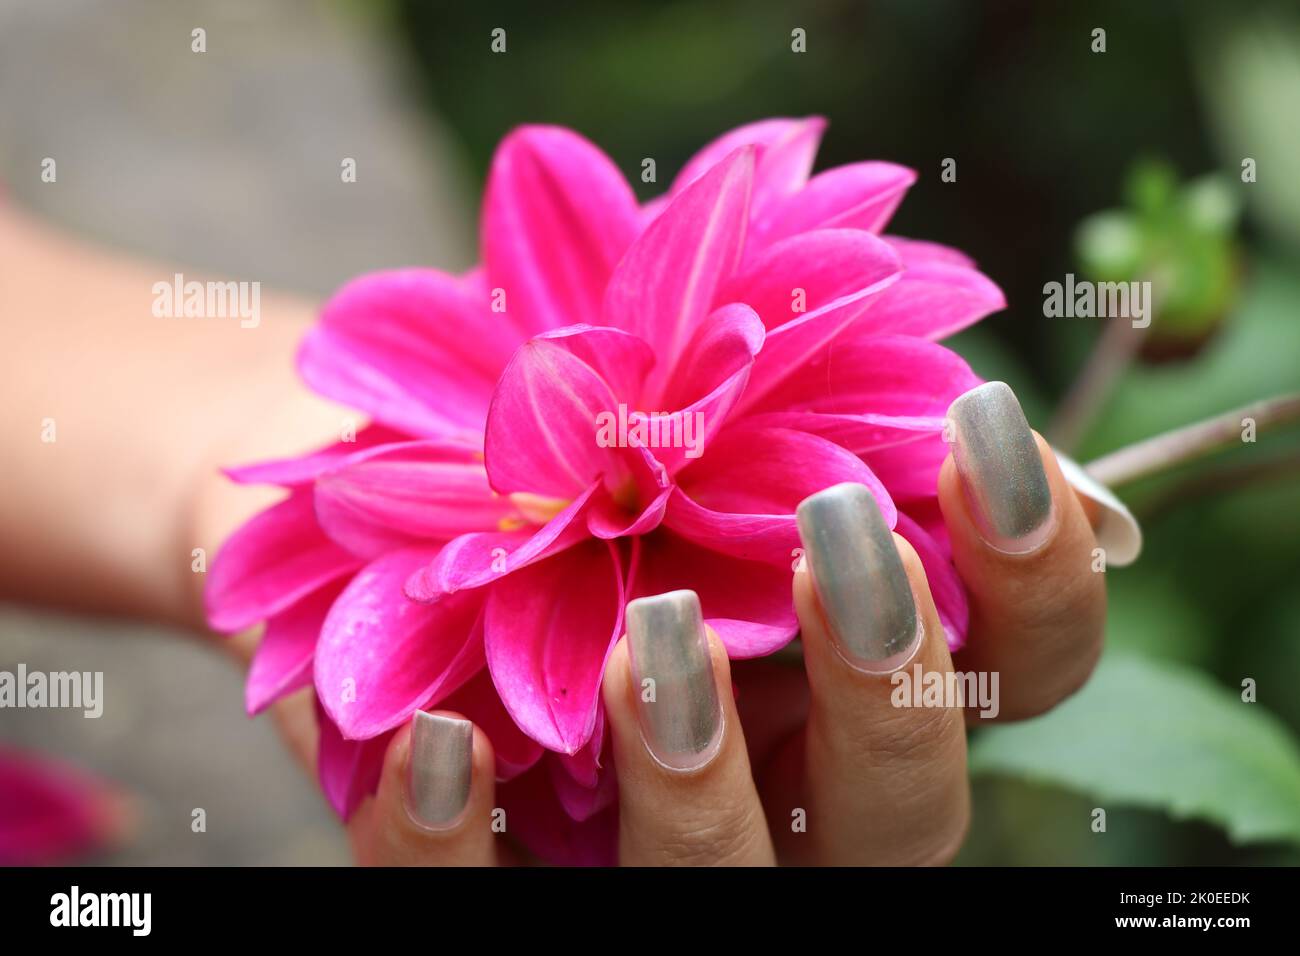 Holding a fully blooming pink dahlia flower, Beautiful natural flowers Stock Photo